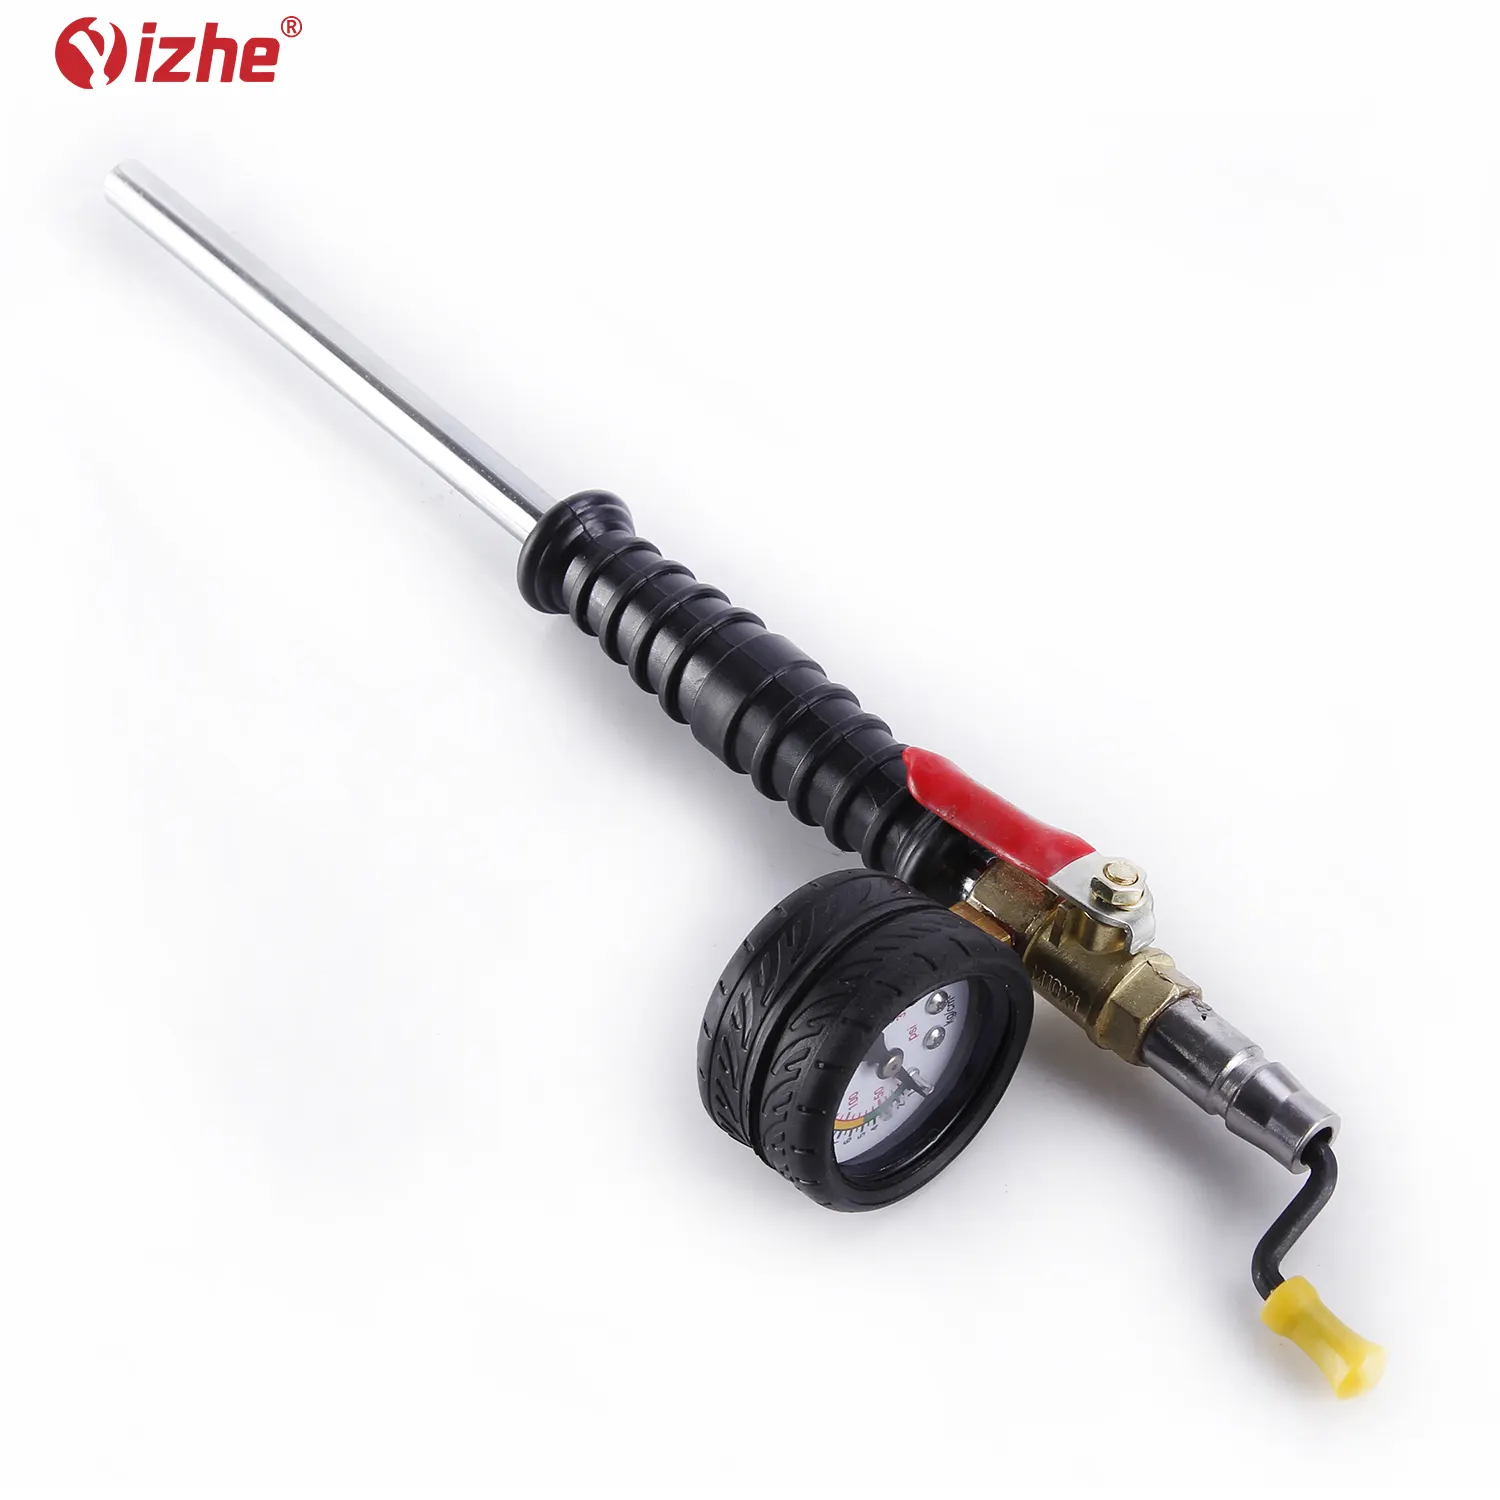 Car Fast Filling Rod Tyres Repair Tools,Aluminum Alloy Tire Inflatable Rod With Pressure Gauge